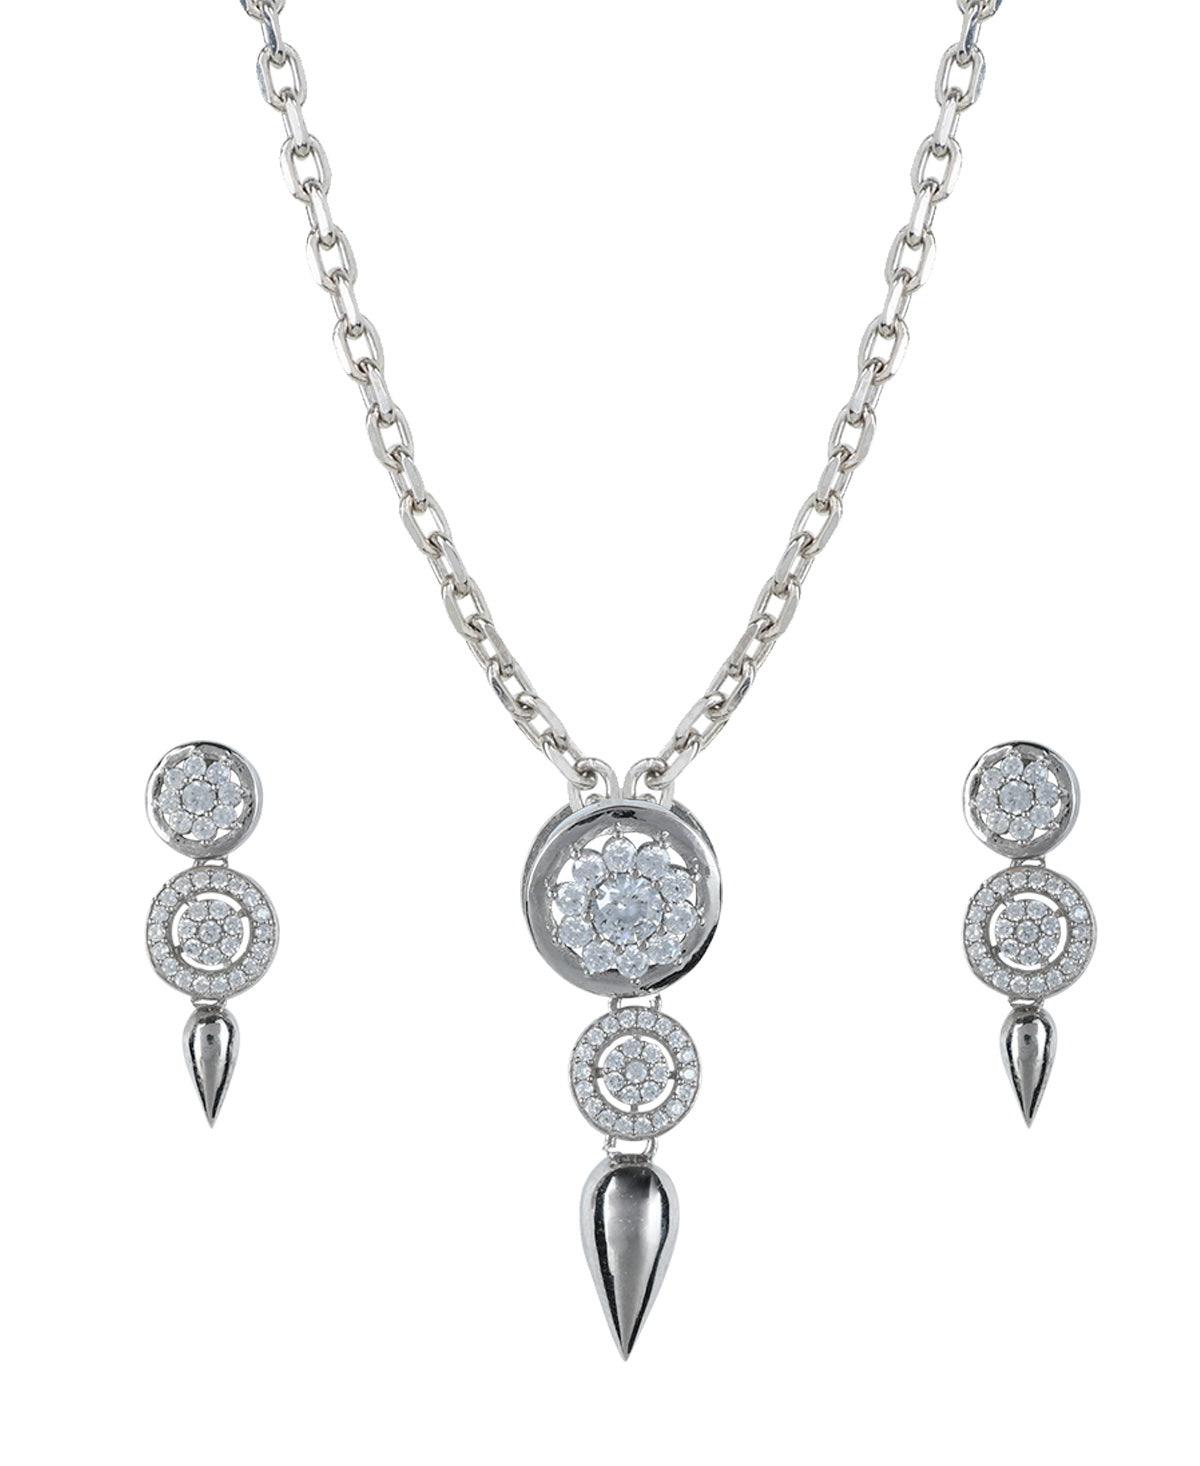 Floral Stone Studded Silver Pendant Set - Chandrani Pearls